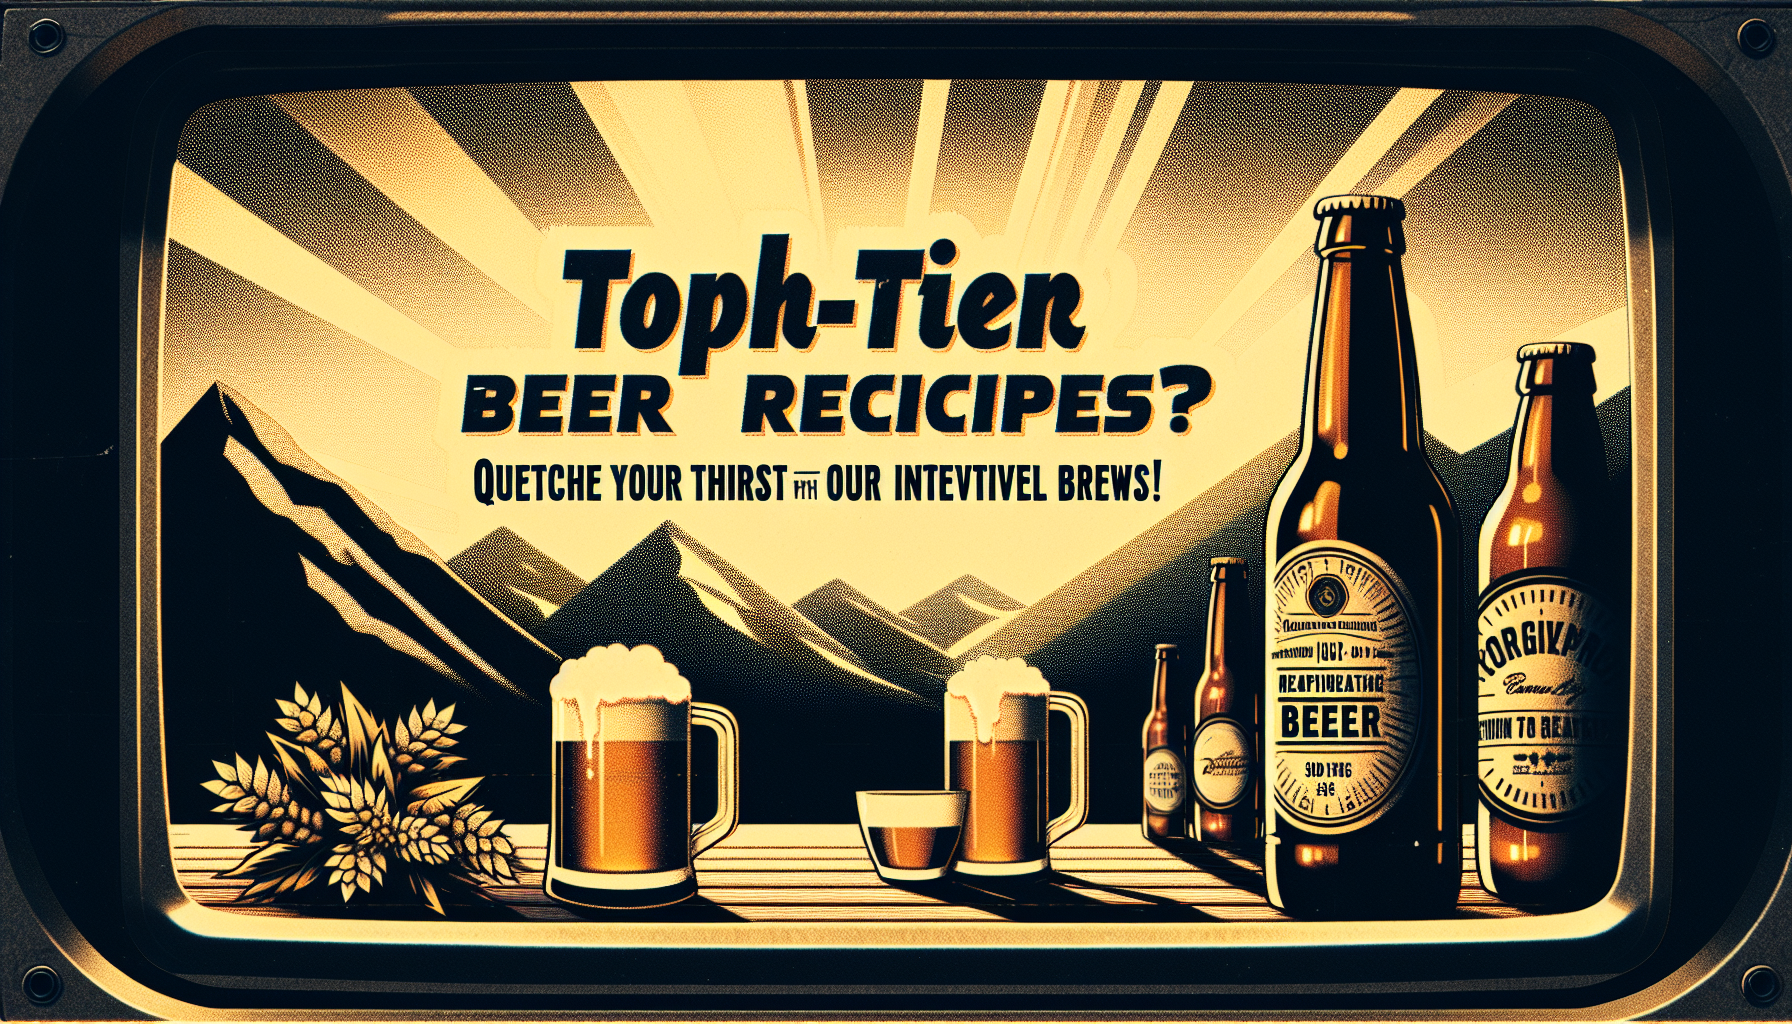 Looking for the best beer recipes? Let’s quench your thirst with these creative brews!